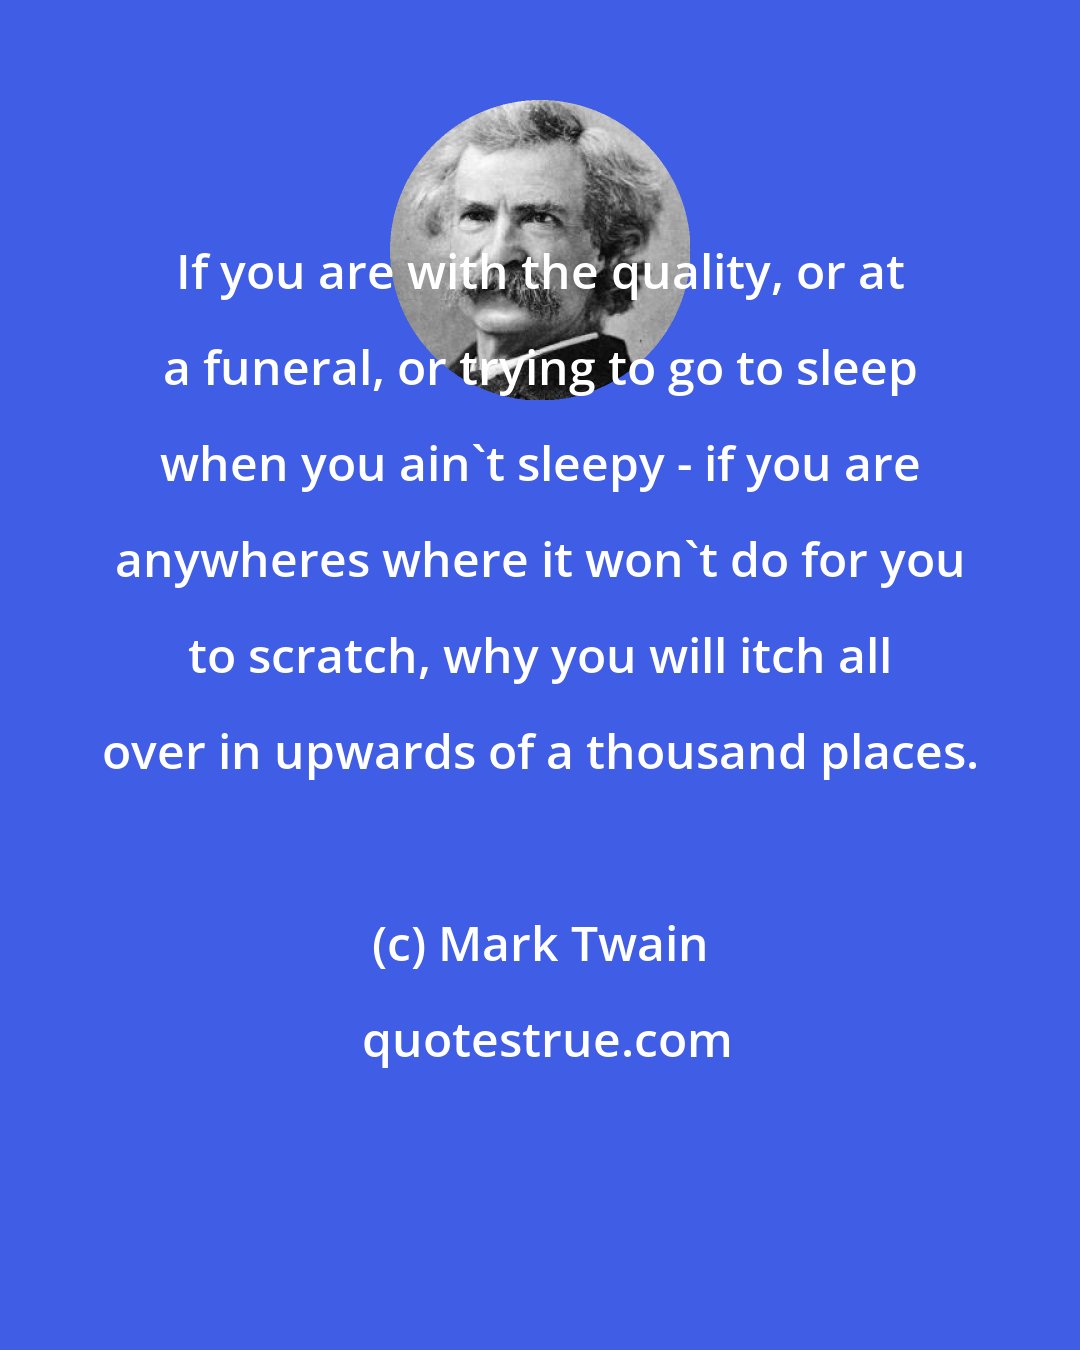 Mark Twain: If you are with the quality, or at a funeral, or trying to go to sleep when you ain't sleepy - if you are anywheres where it won't do for you to scratch, why you will itch all over in upwards of a thousand places.